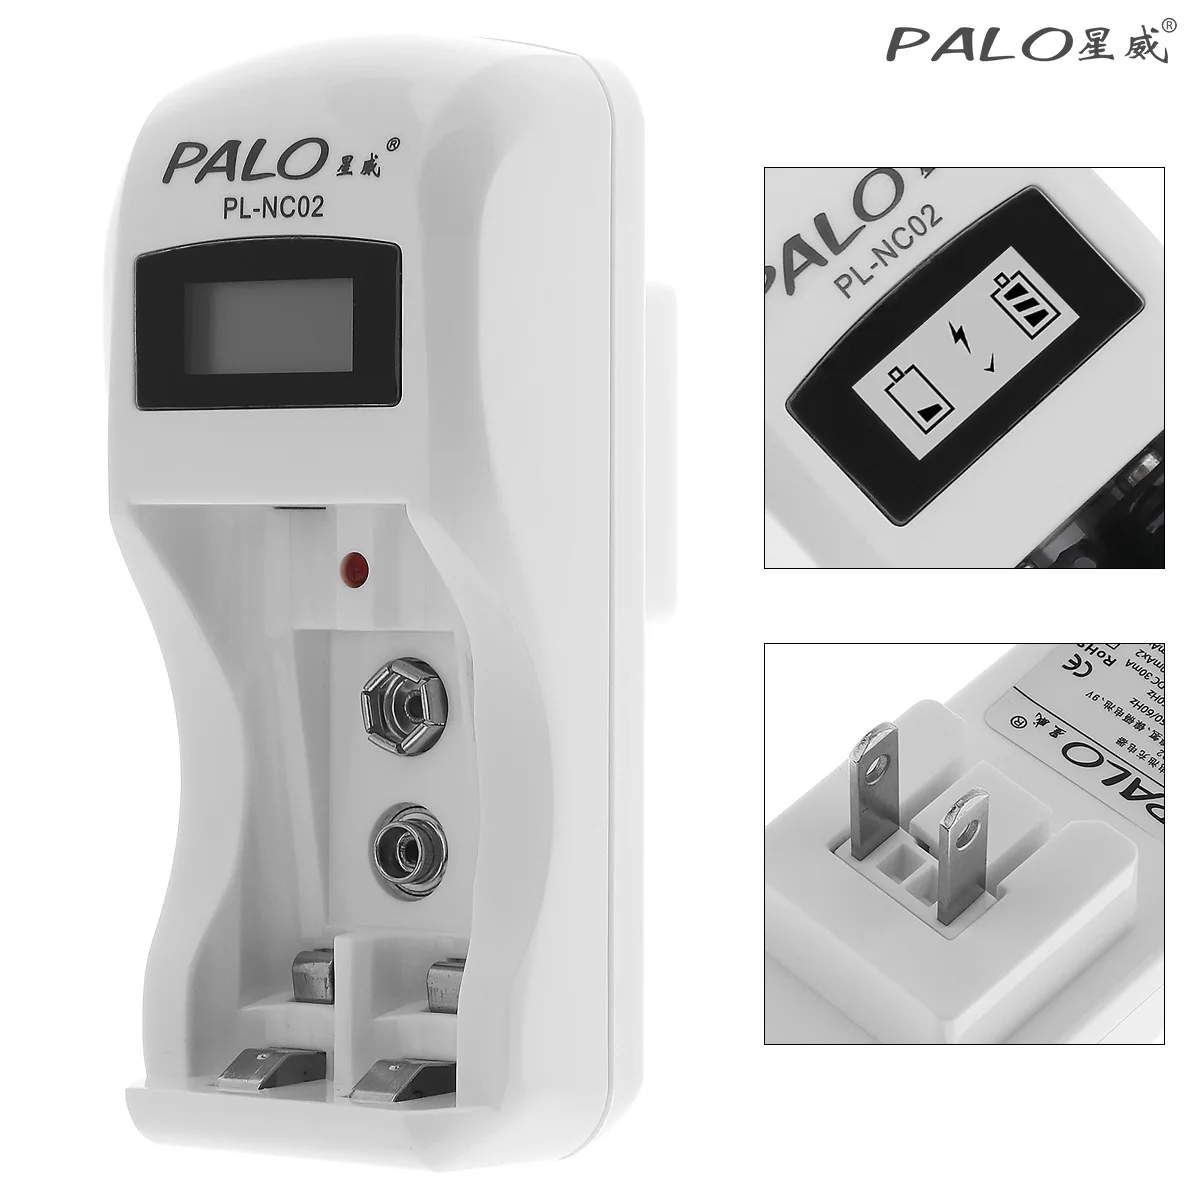 

PALO Intelligent Smart NiMH Battery Charger with 2 Slots LCD Display for 9V Li-ion Ni-MH AAA AA Rechargeable Battery Charger